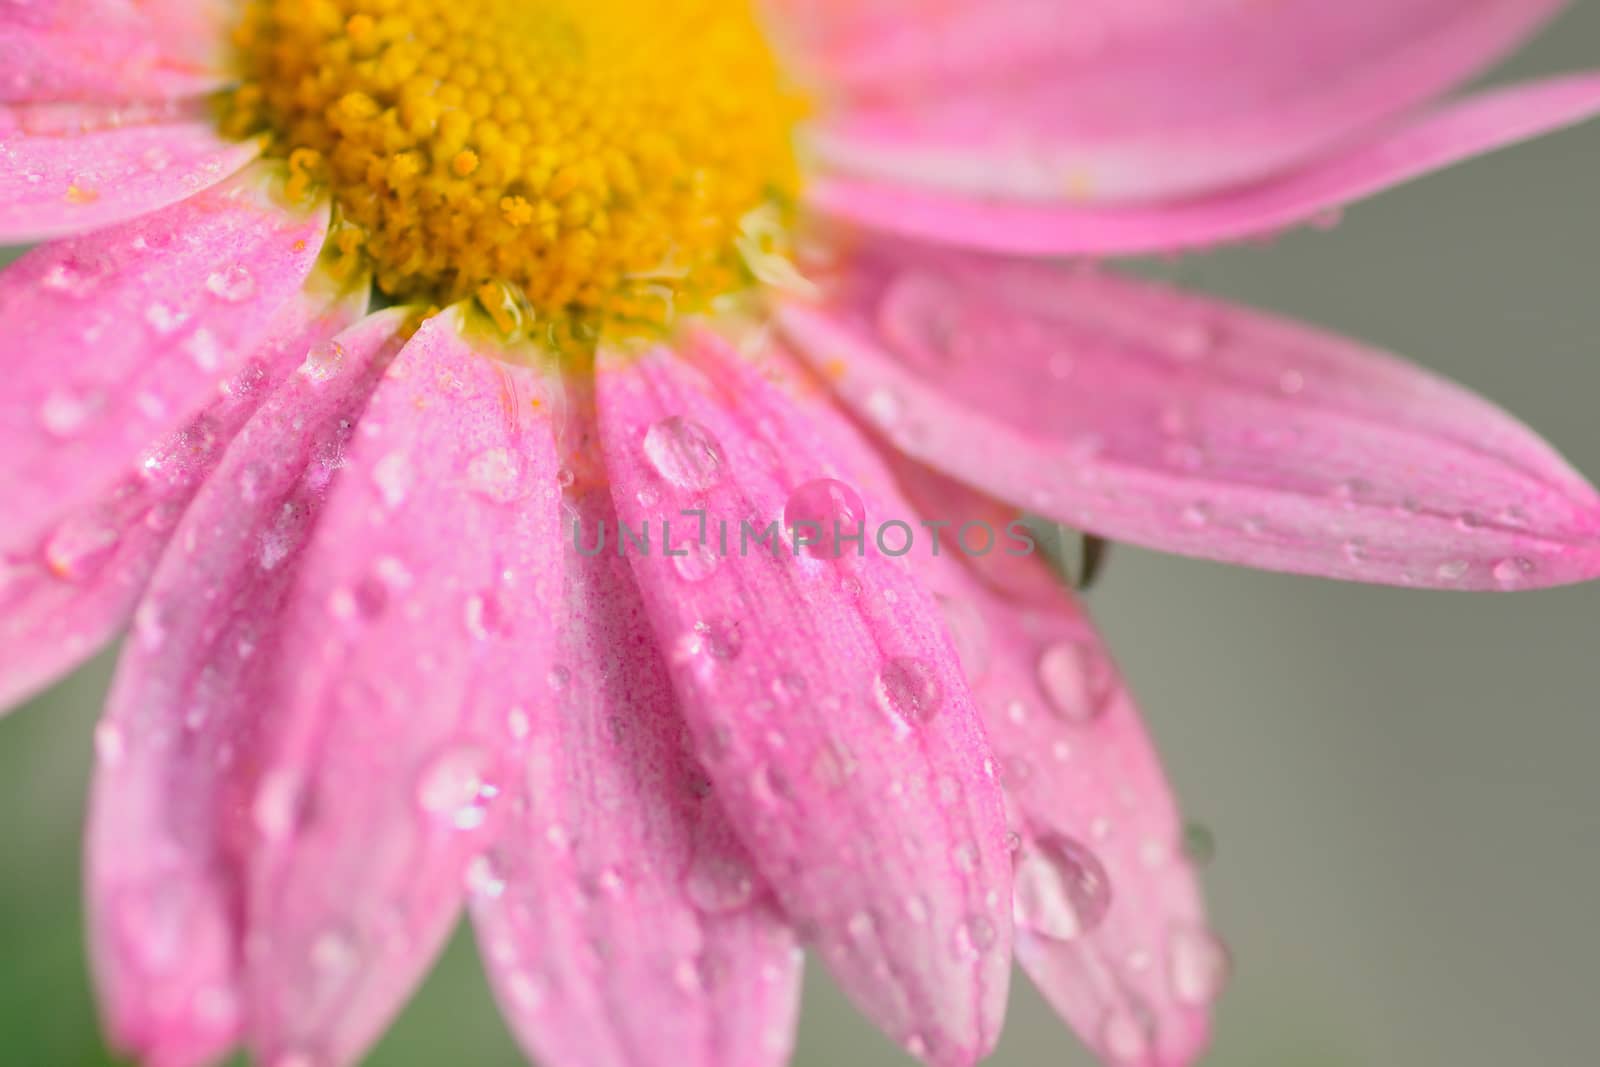 Macro texture of pink colored Daisy flowers with water droplets by shubhashish